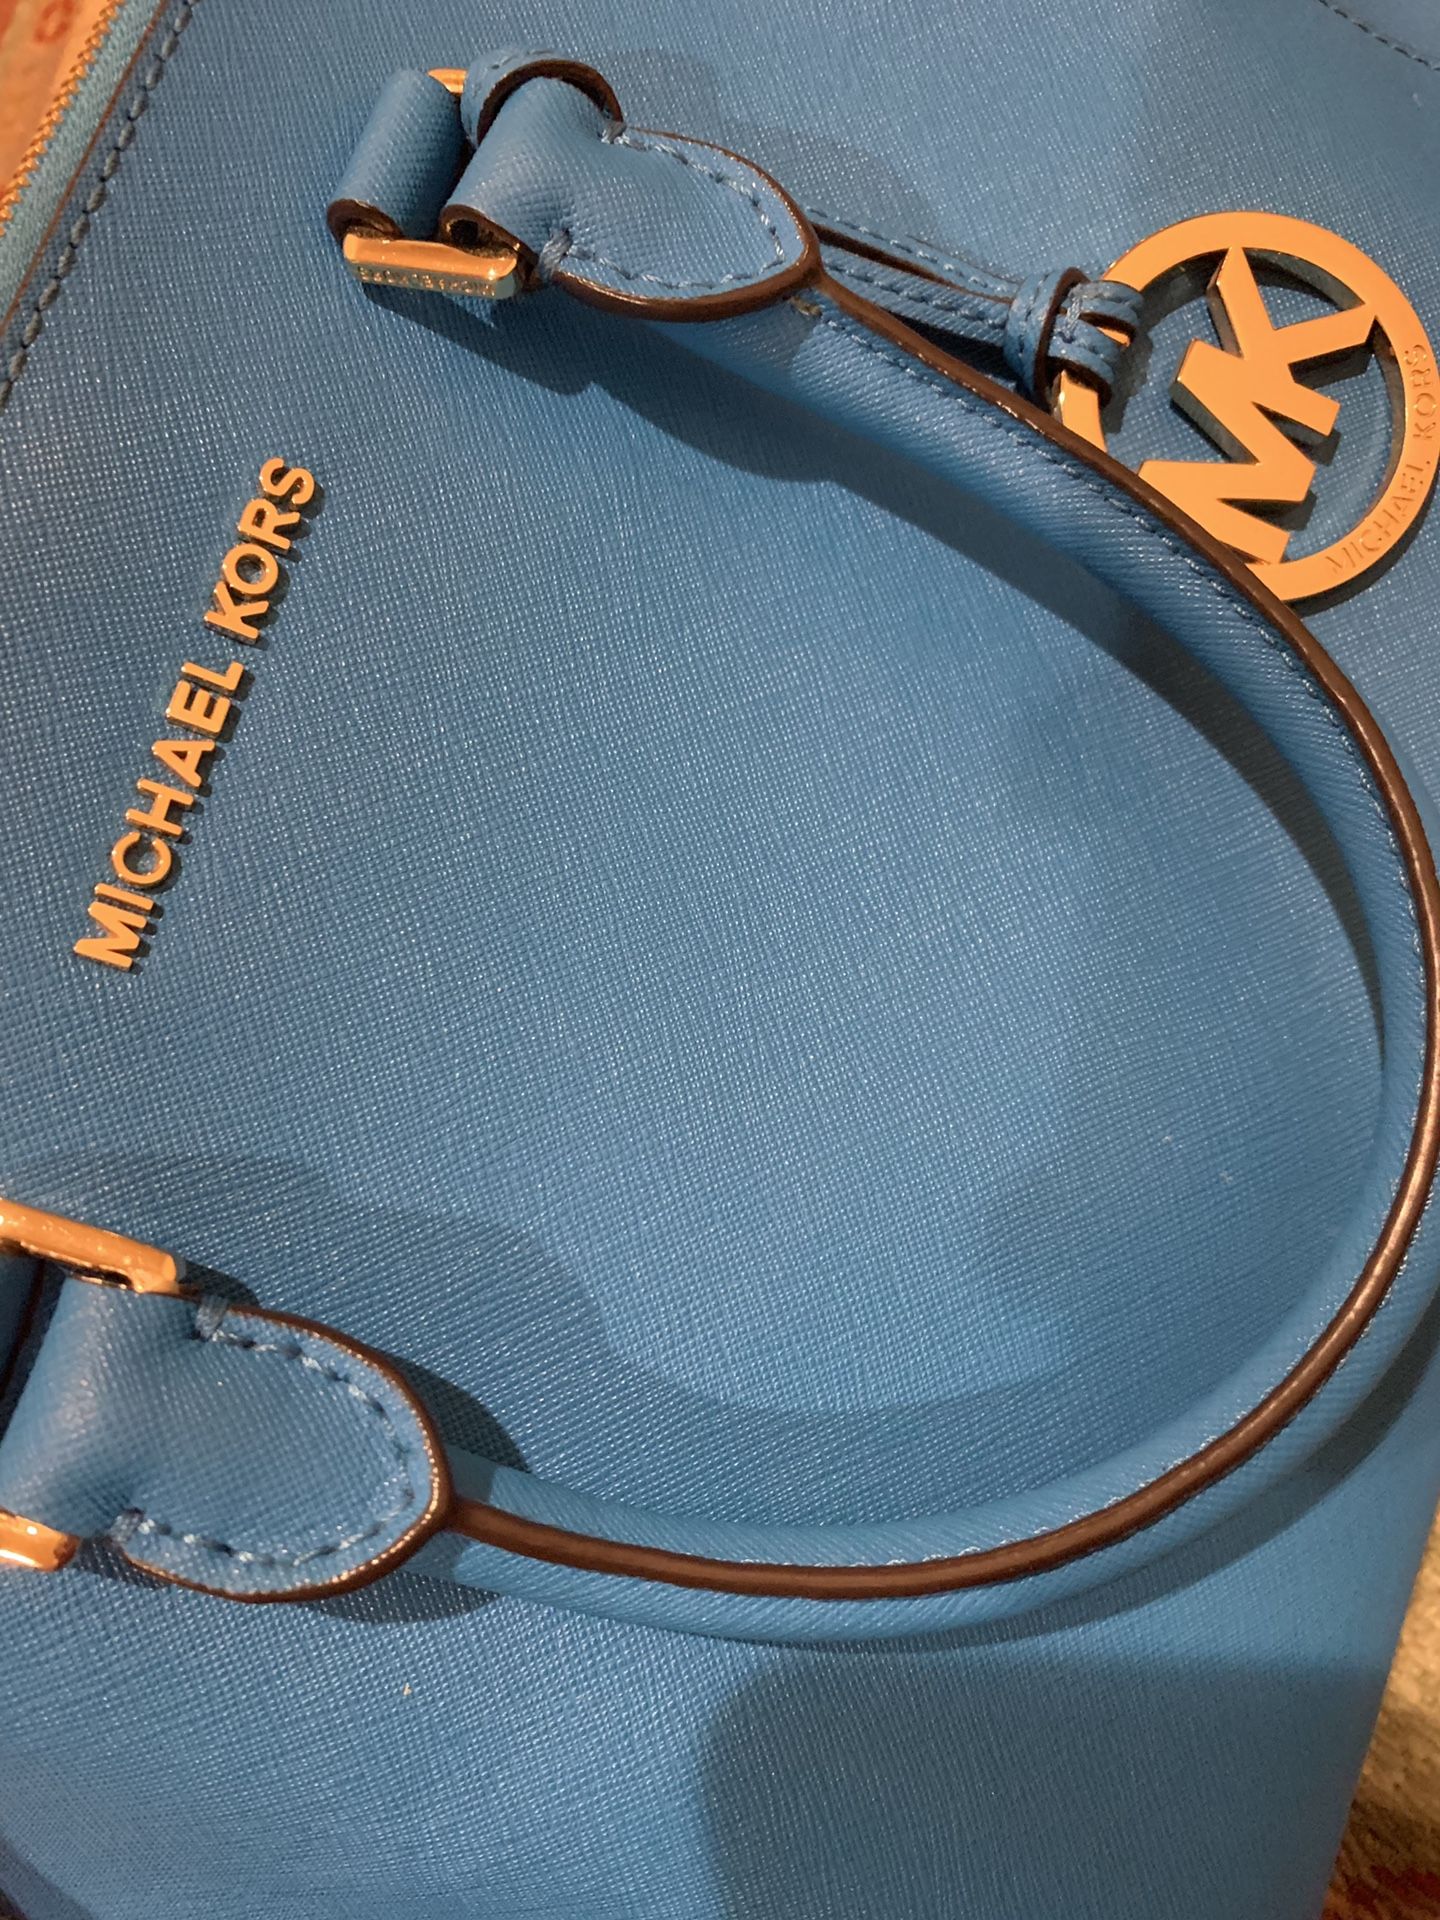 Turqoise MK BAG satchel with additional strap